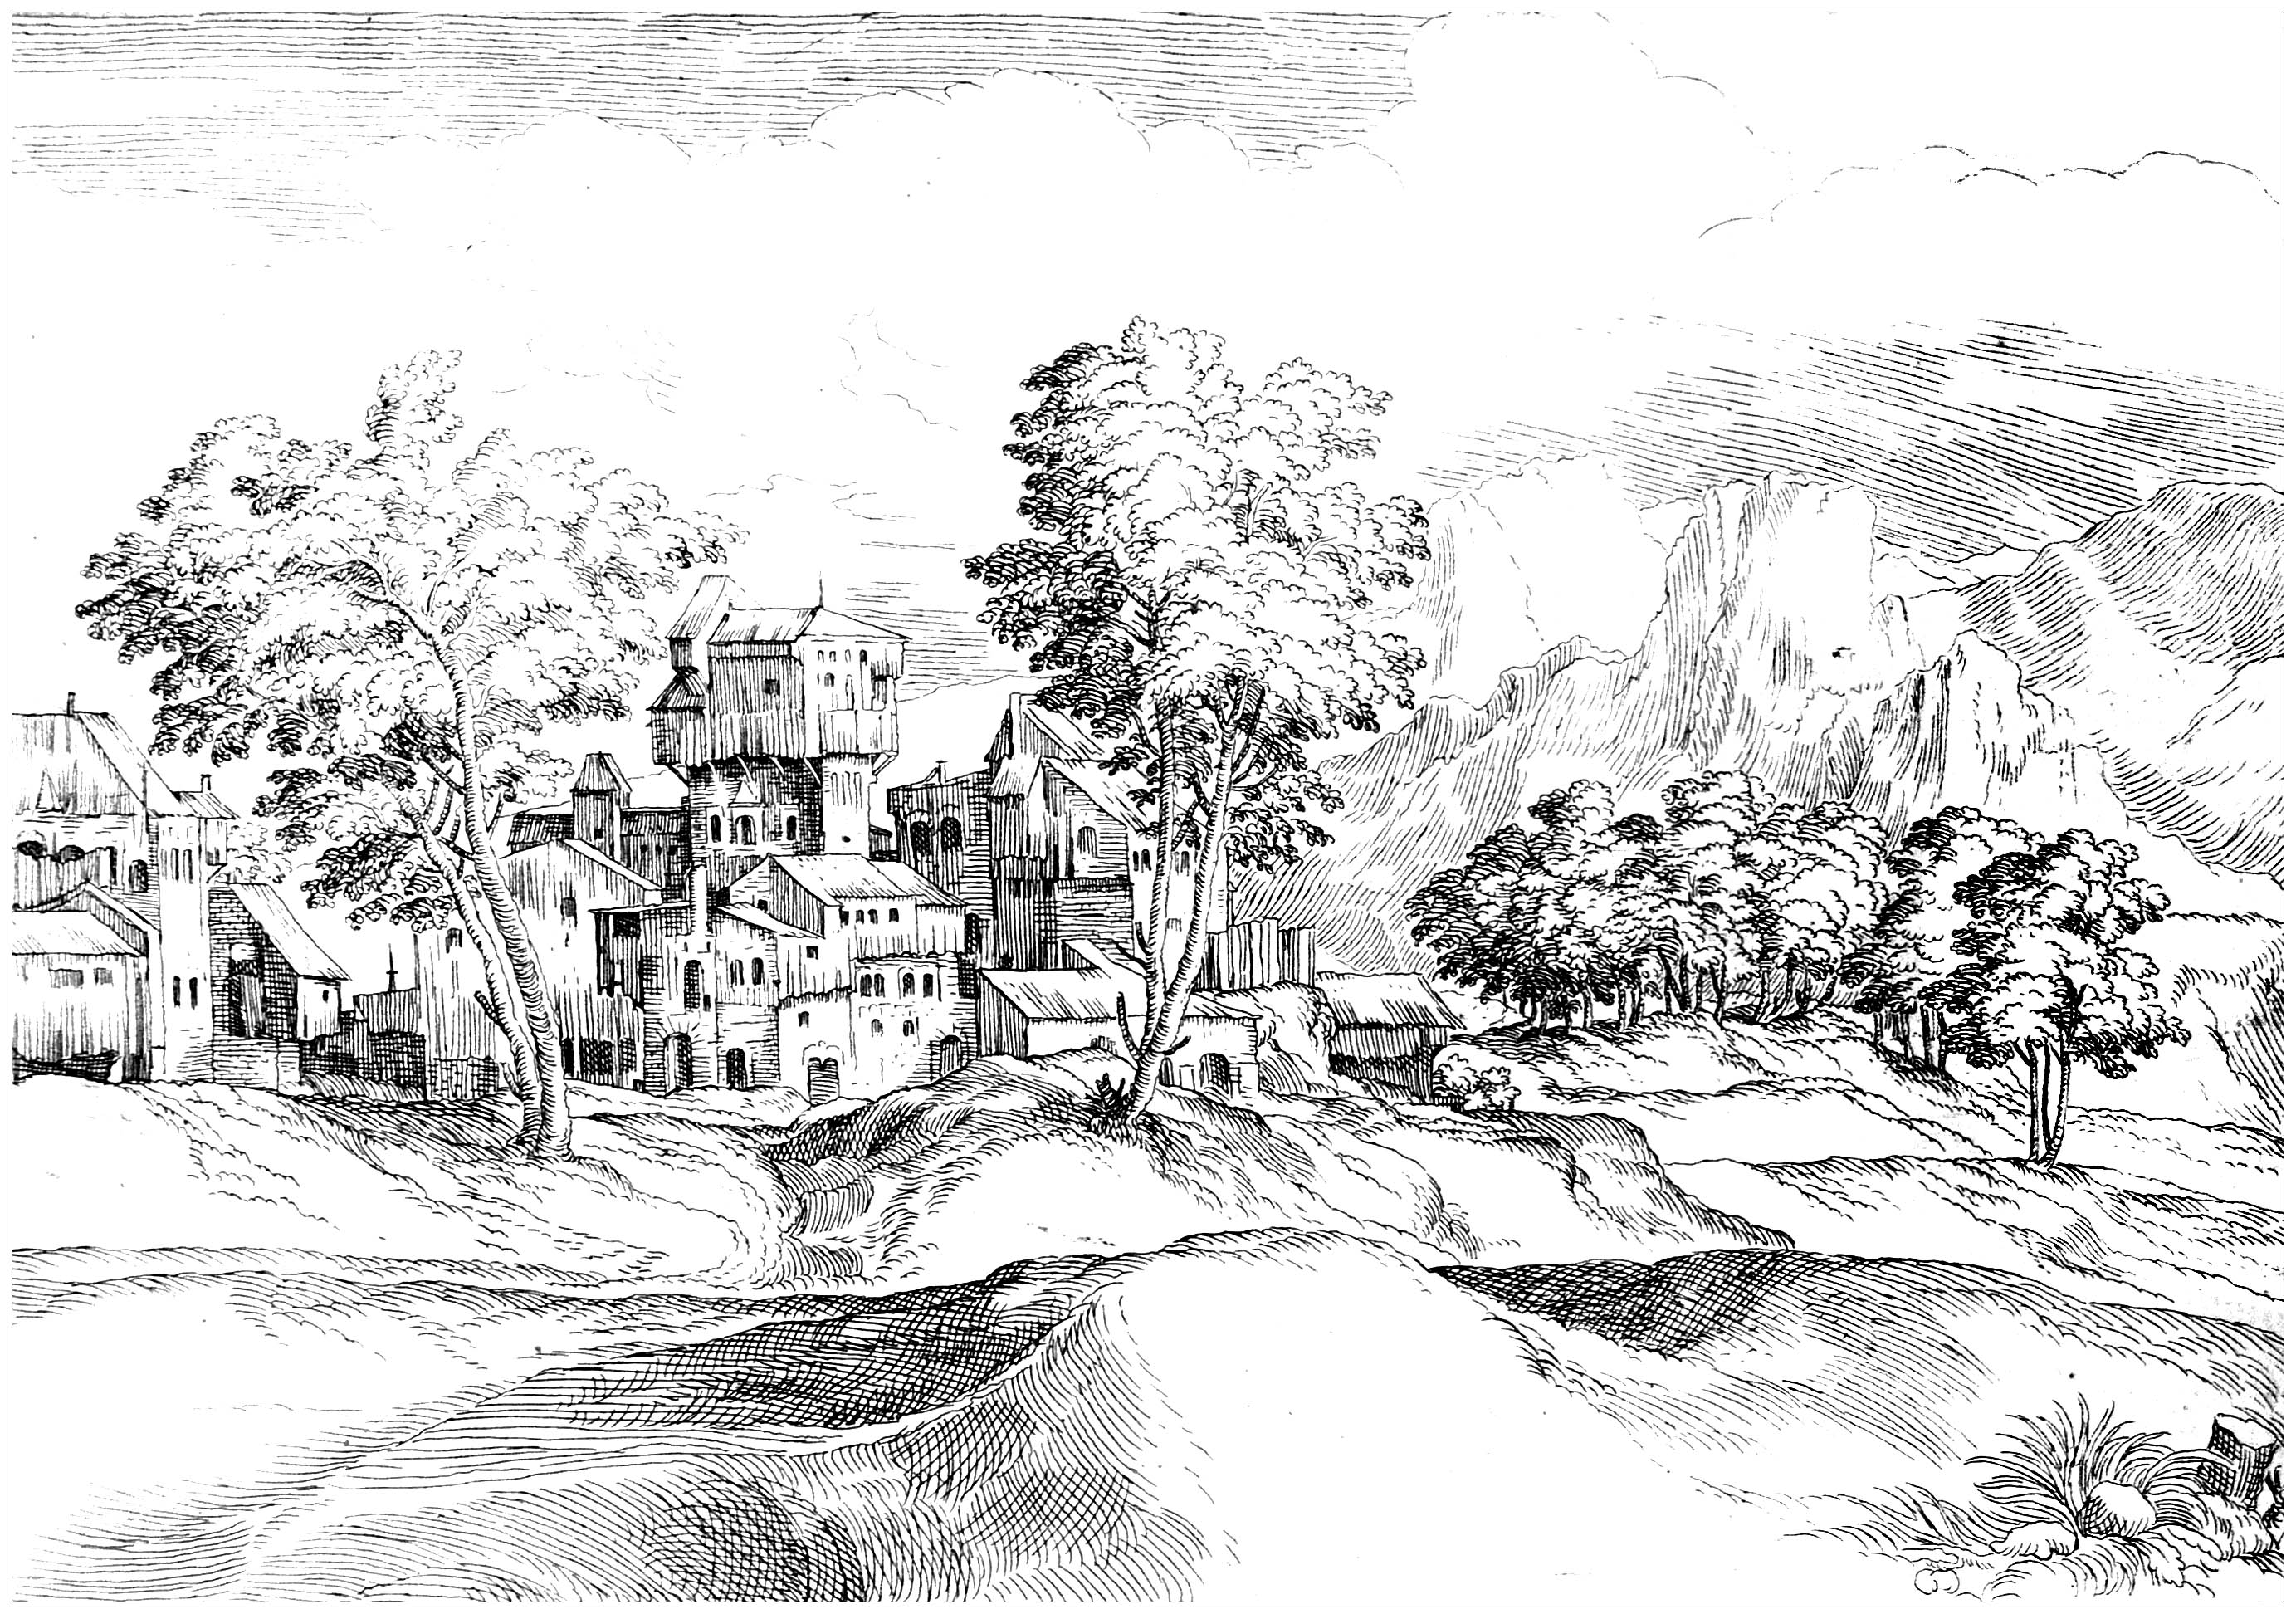 Landscape drawing, 17th century